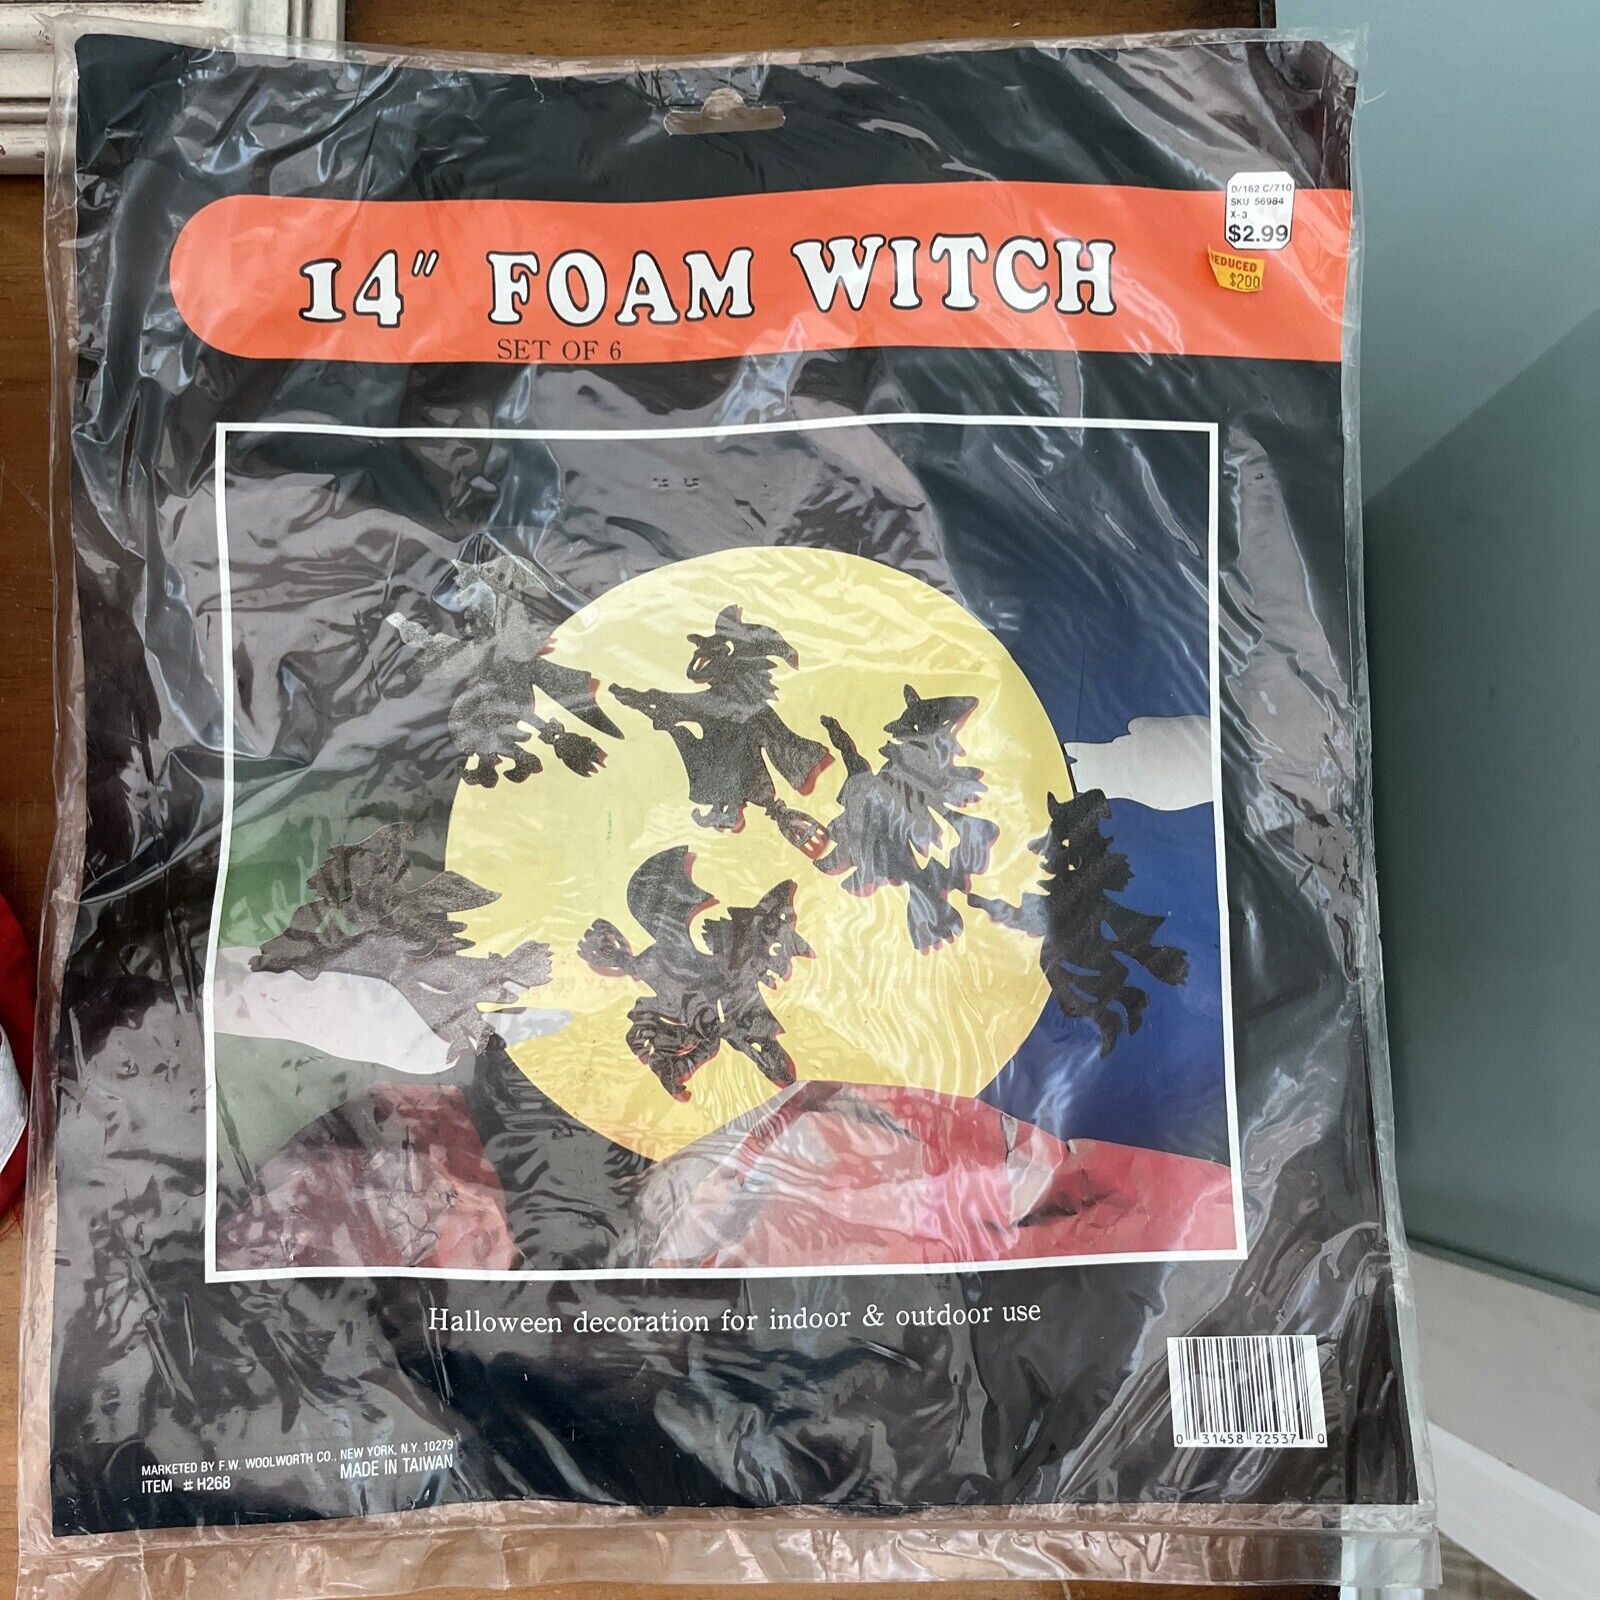 Vintage Woolworth Halloween 1970s 14” Foam Witch, Set Of 6. Made In Taiwan. NOS